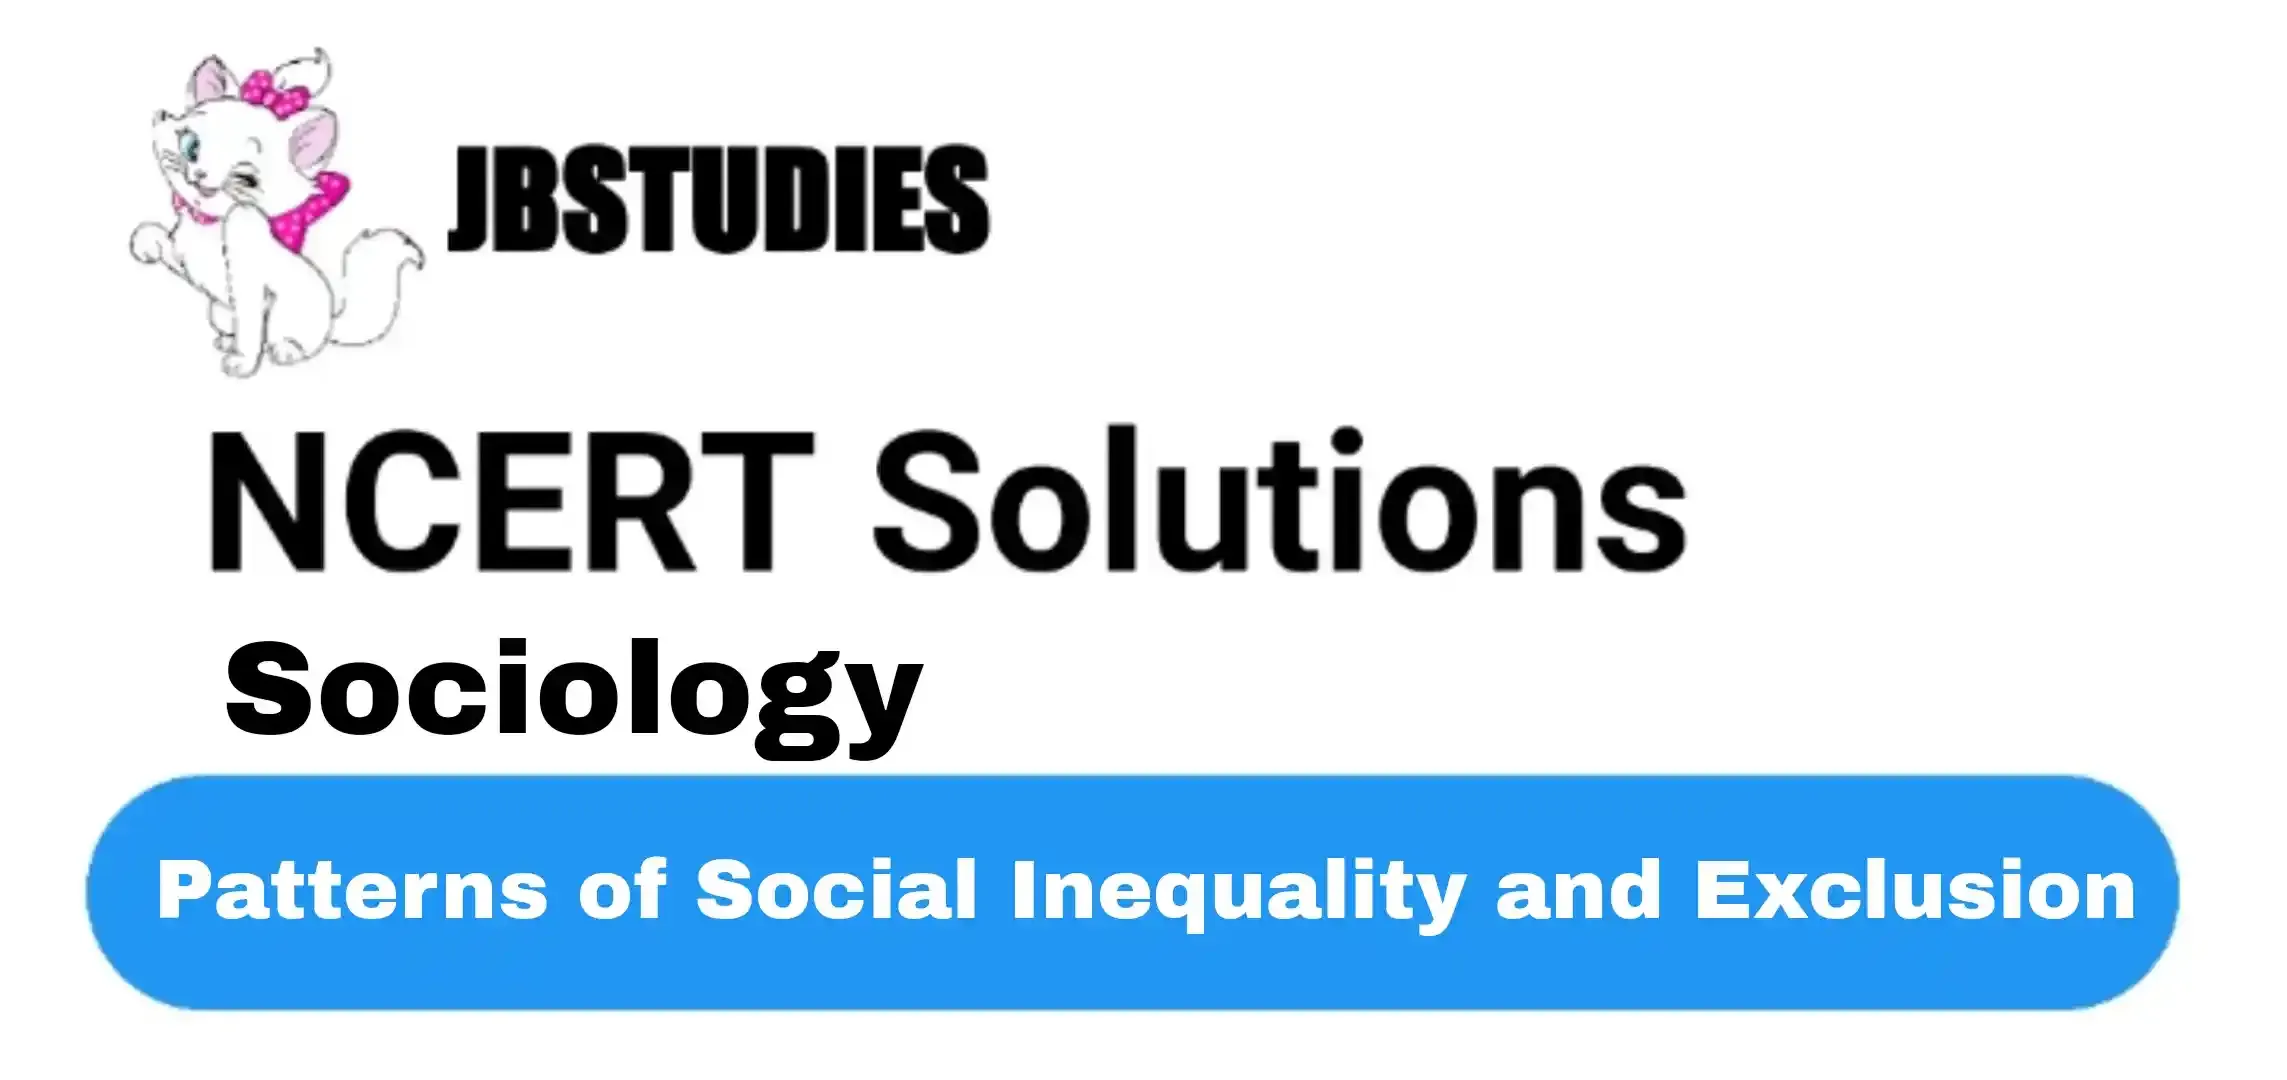 Solutions Class 12 Sociology Chapter -5 (Patterns of Social Inequality and Exclusion)